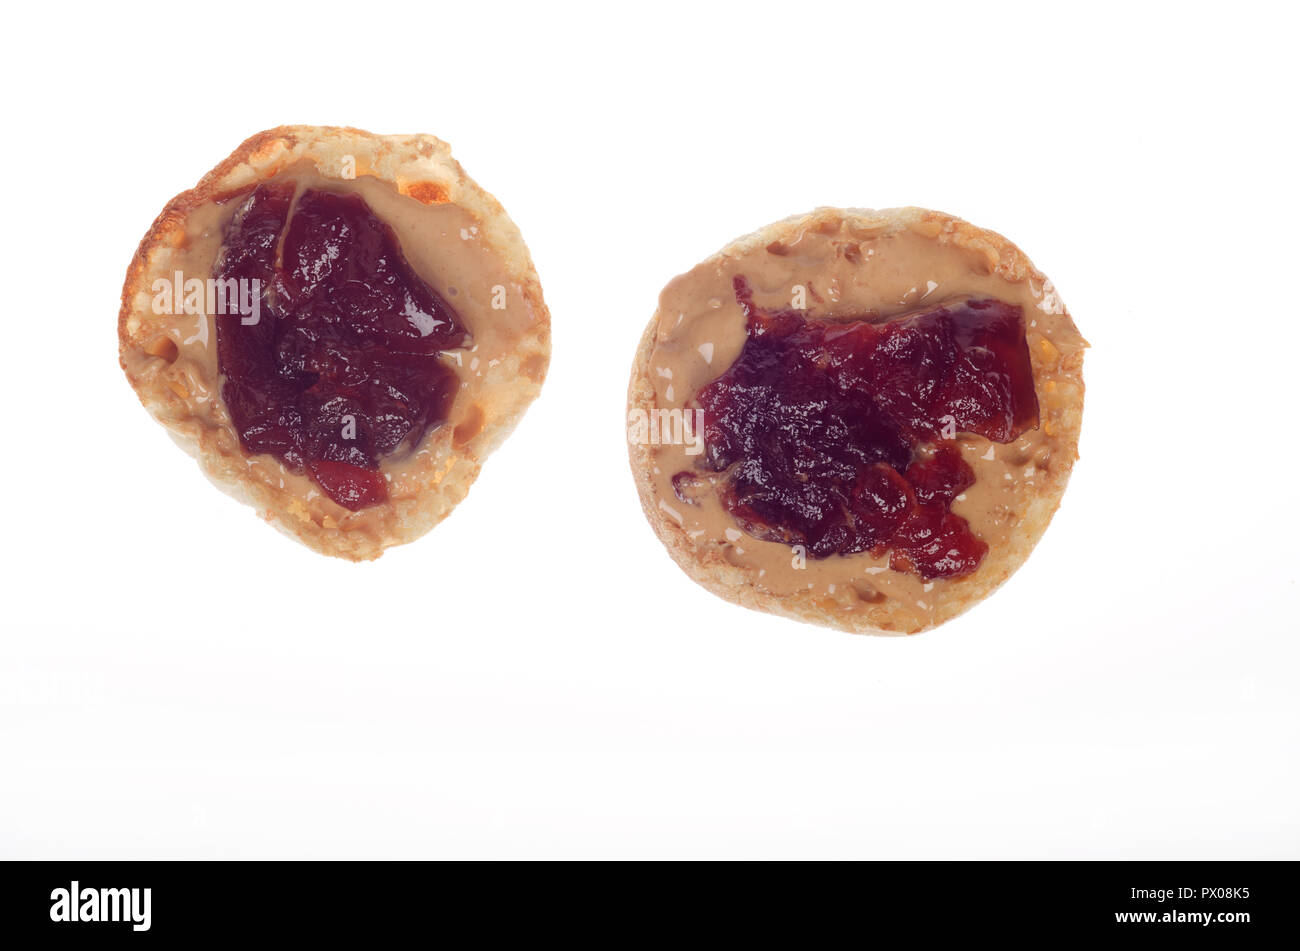 Peanut butter and jelly on an english muffin Stock Photo